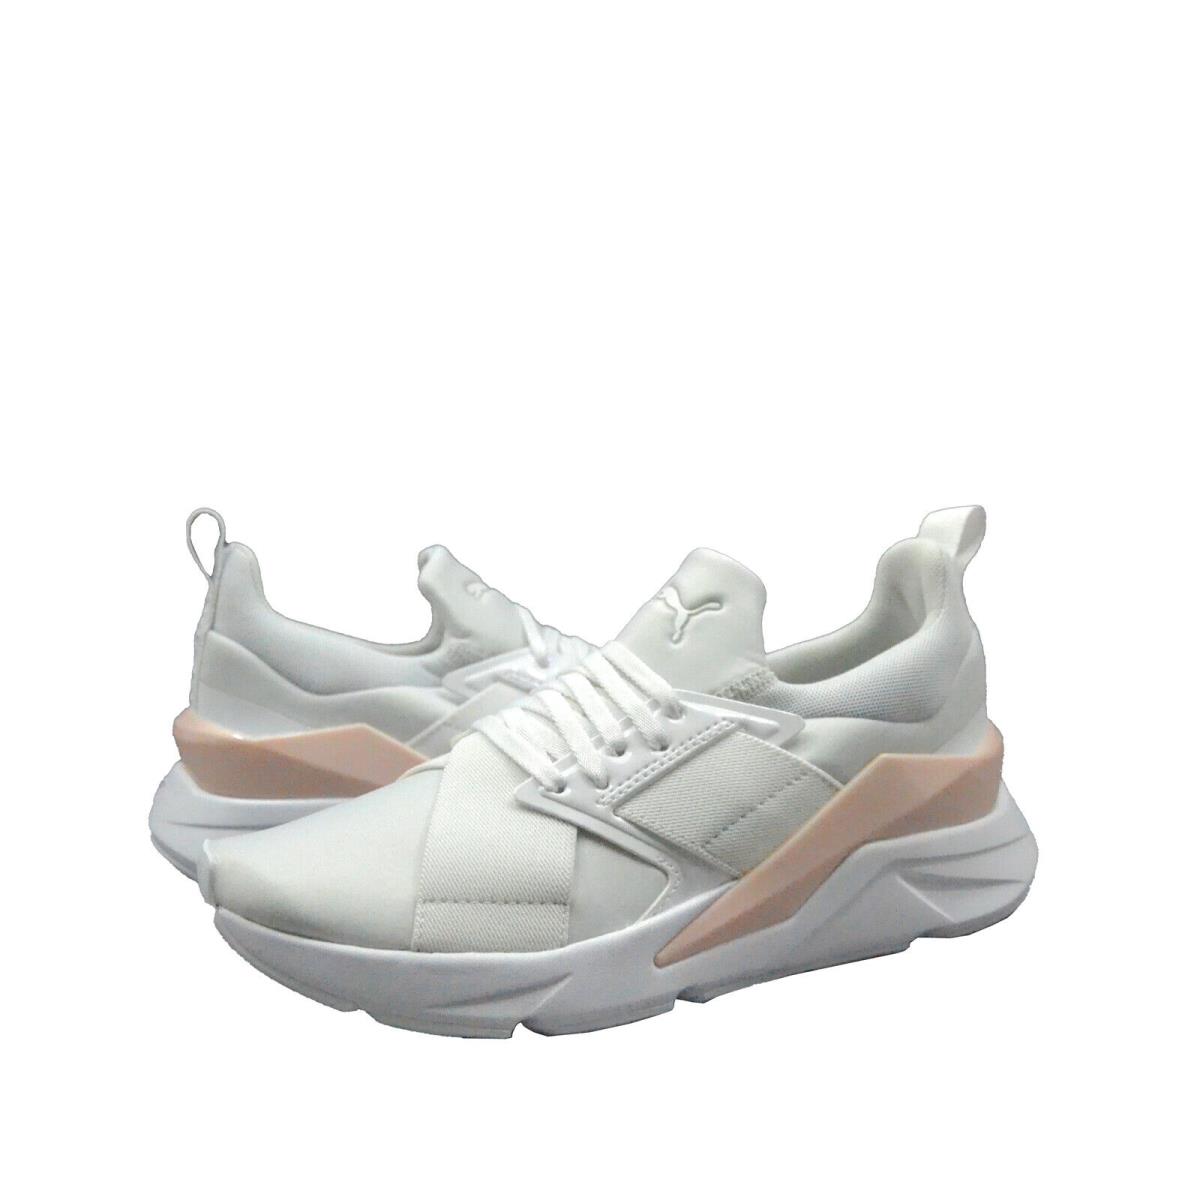 Women`s Shoes Puma Muse X5 Glow Athletic Sneakers 38314201 Puma White / Pink - White